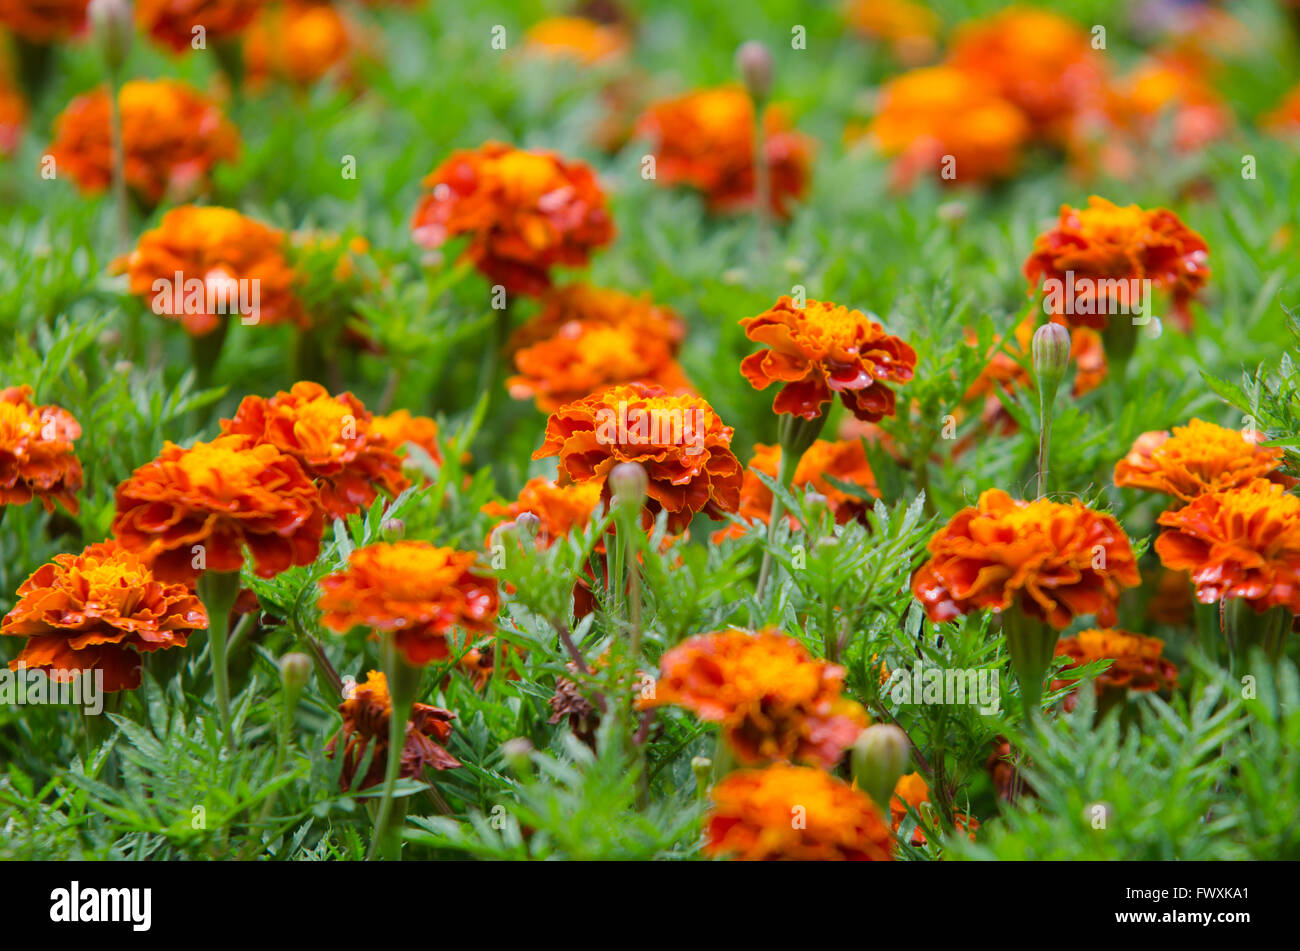 French Marigolds blooming in garden Stock Photo